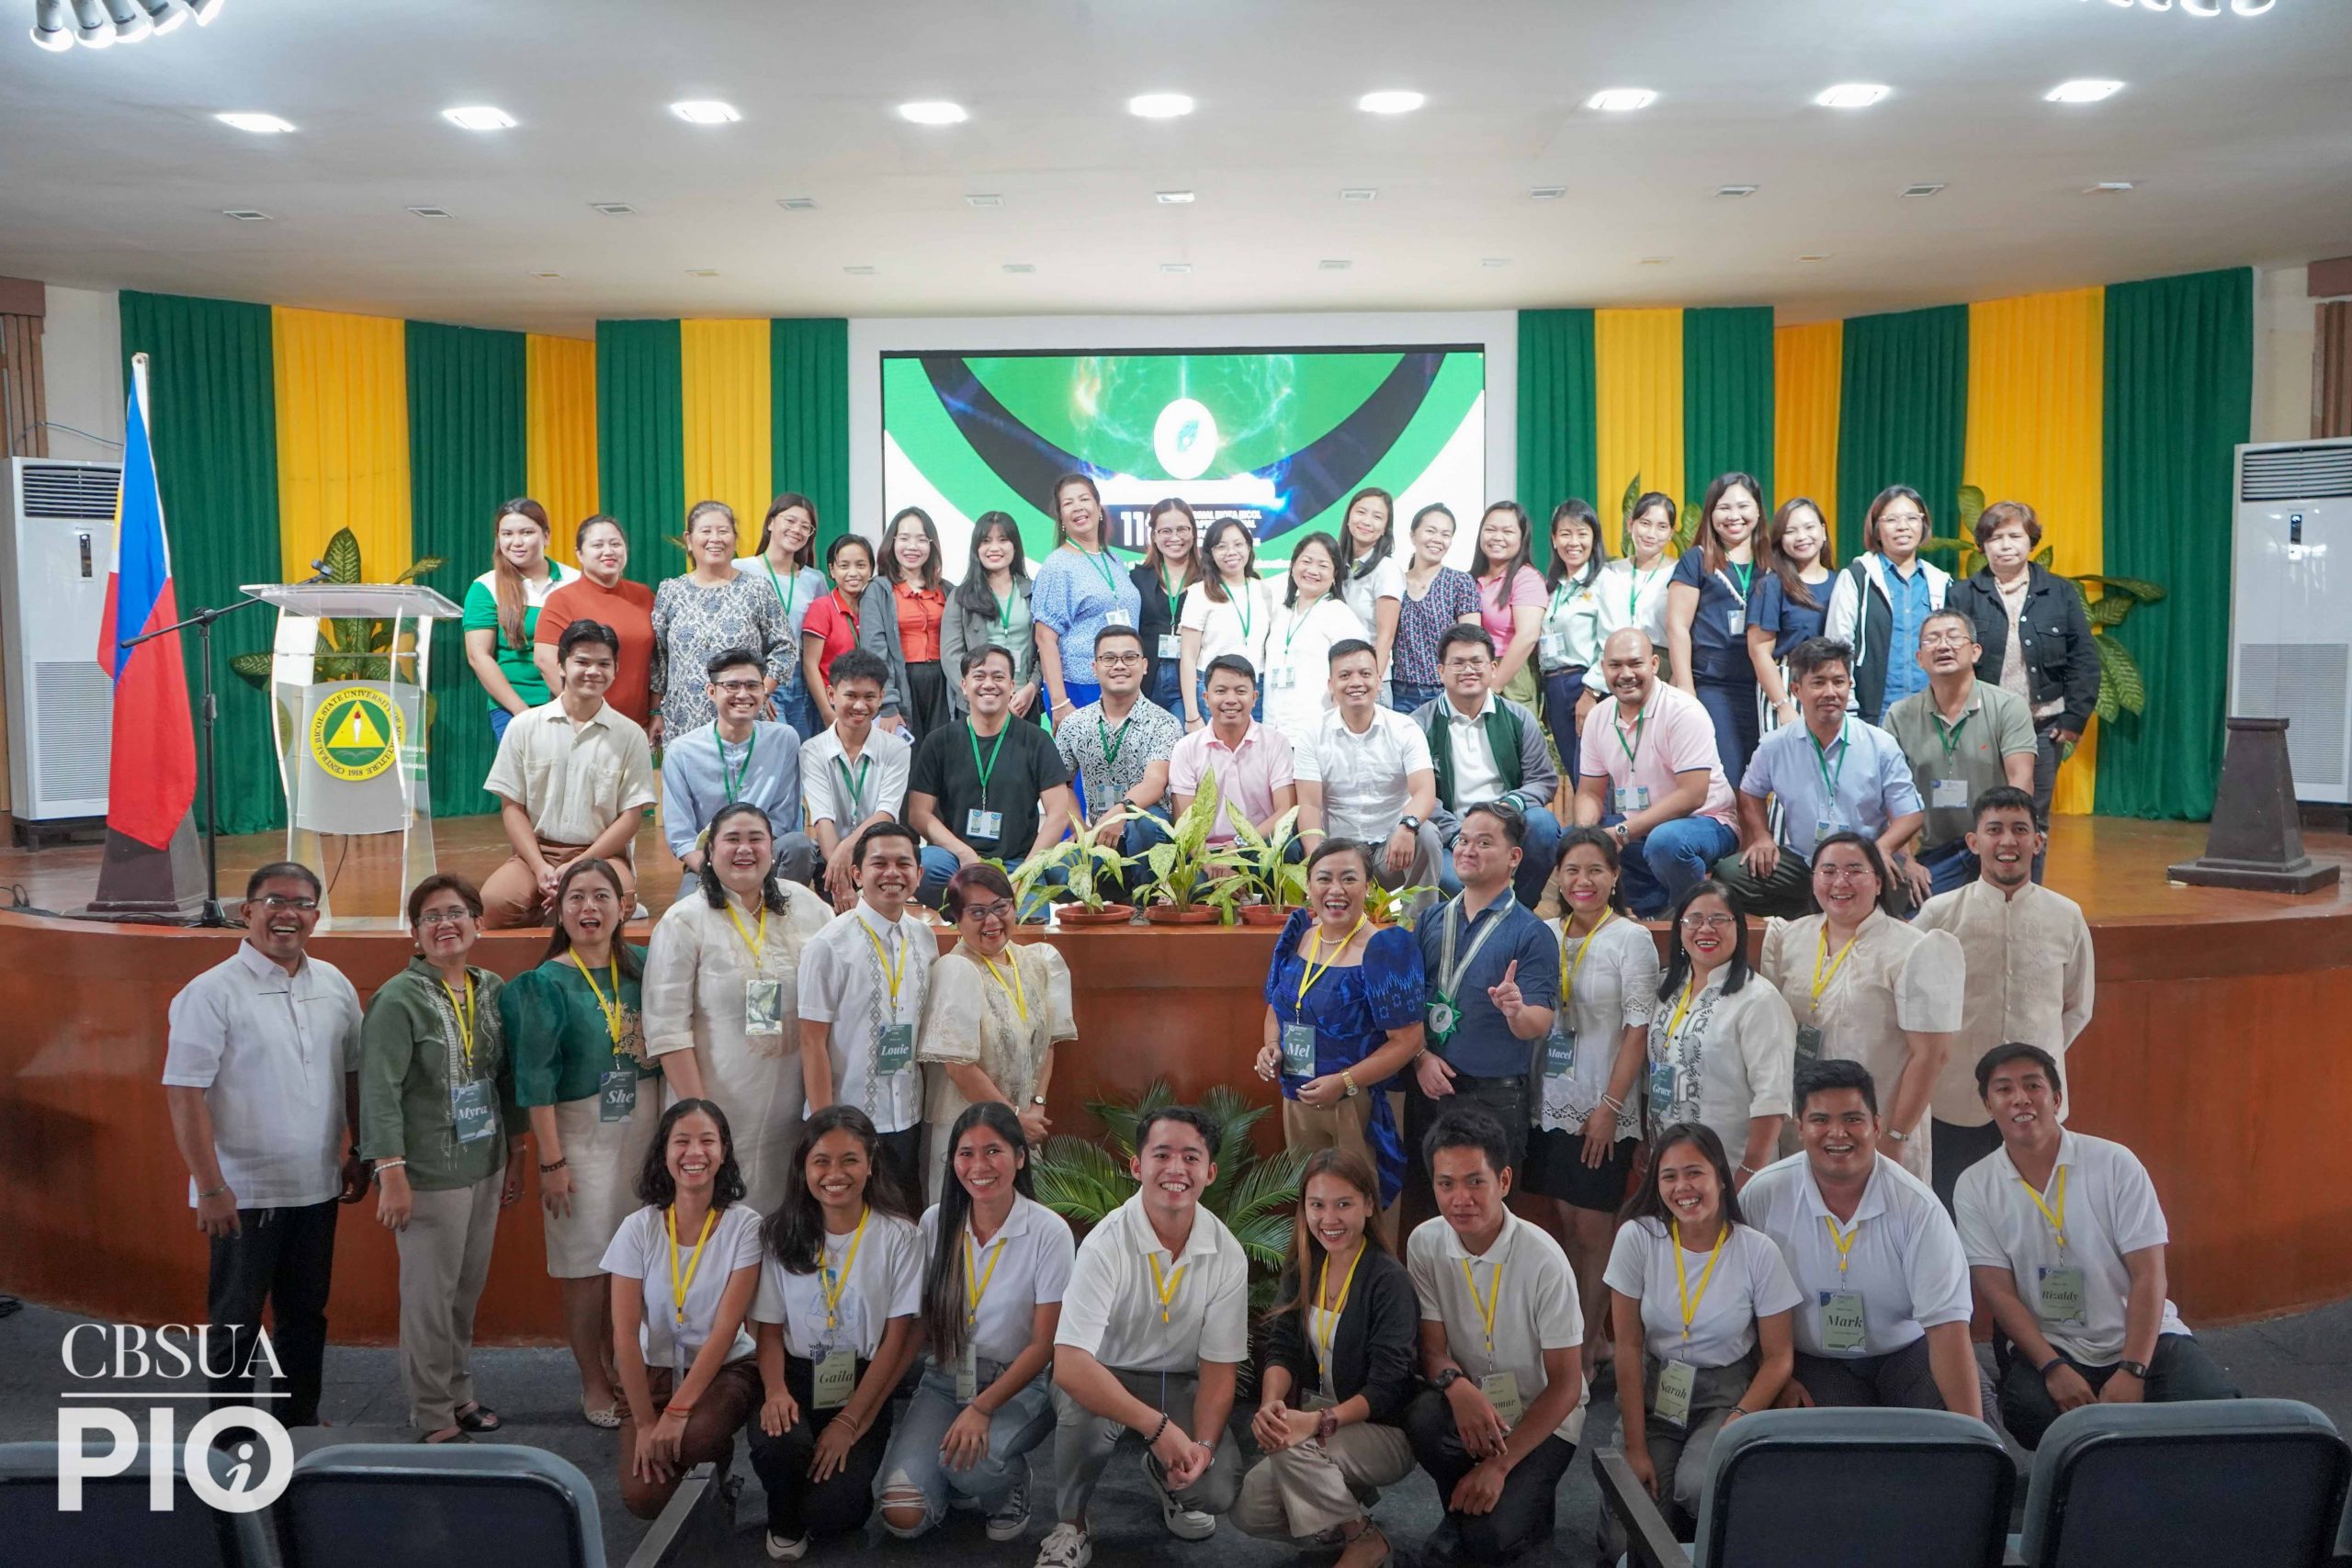 11TH BIOTA BICOL CHAPTER REGIONAL CONVENTION AND SCIENTIFIC SESSIONS KICKS OFF IN CBSUA